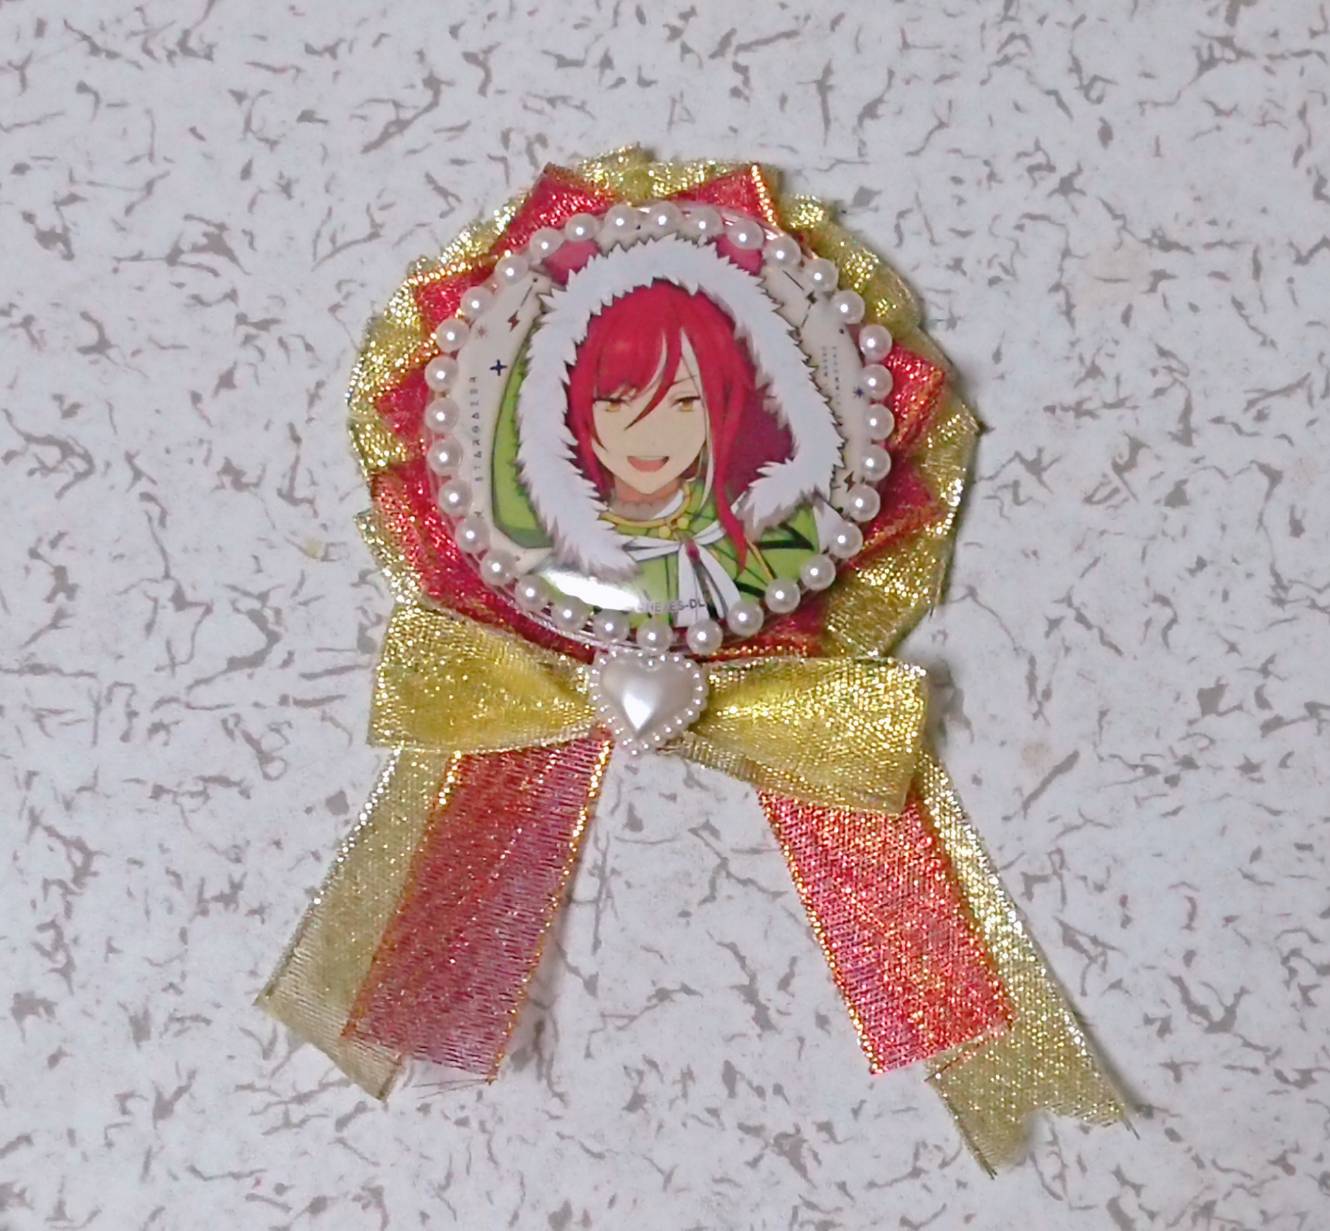 Completion of the rosette